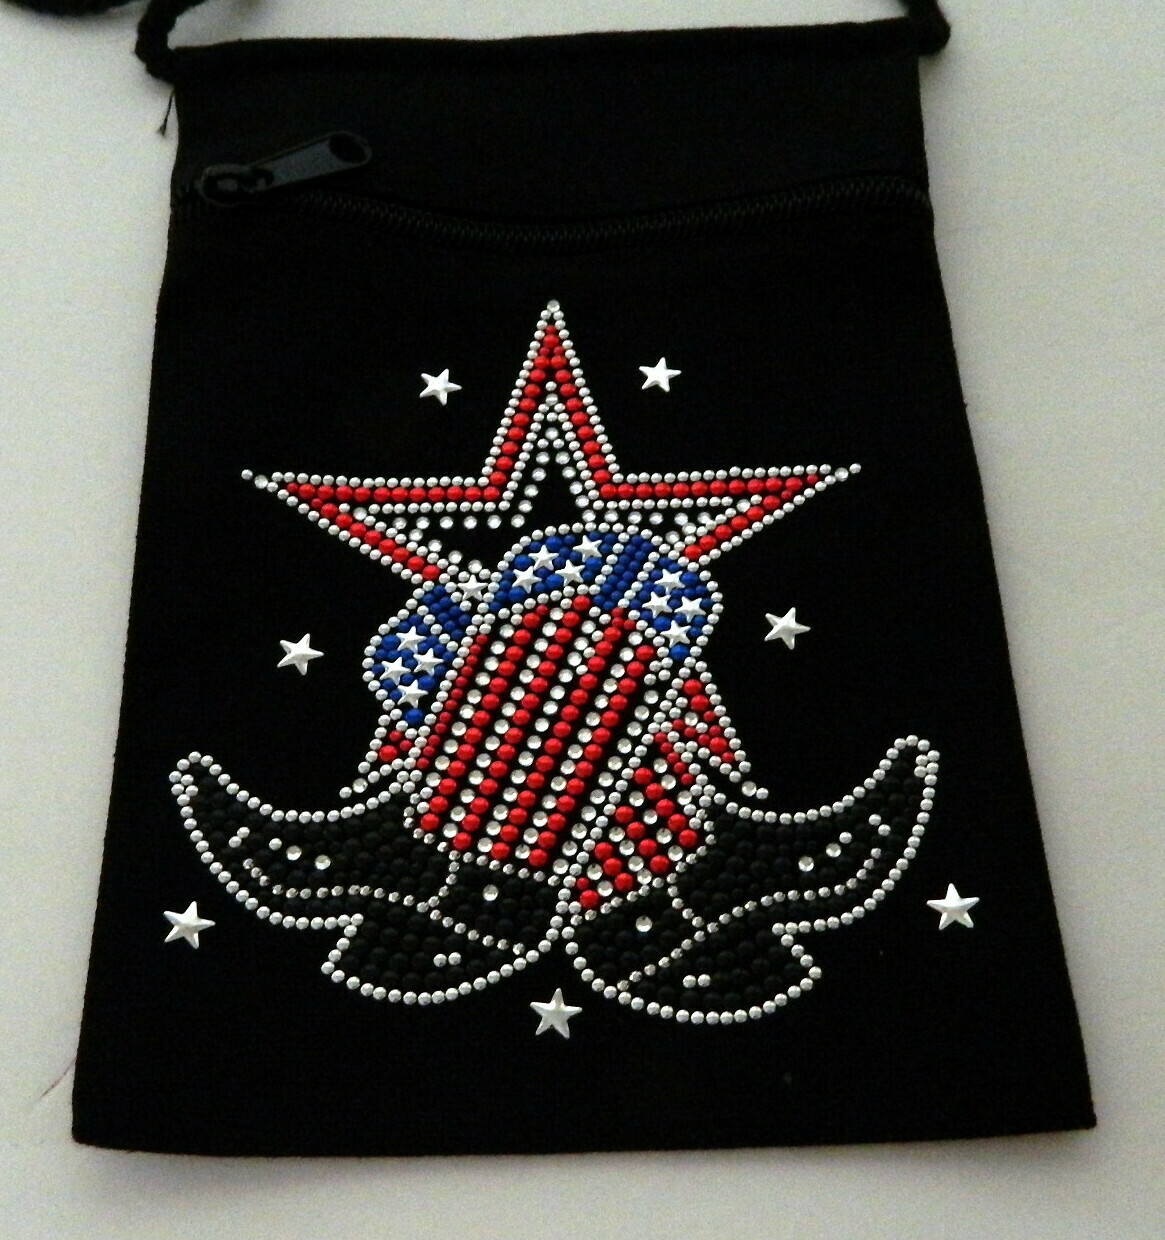 USA BOOT W STAR
Zipperd Embellished Pouch -Black only